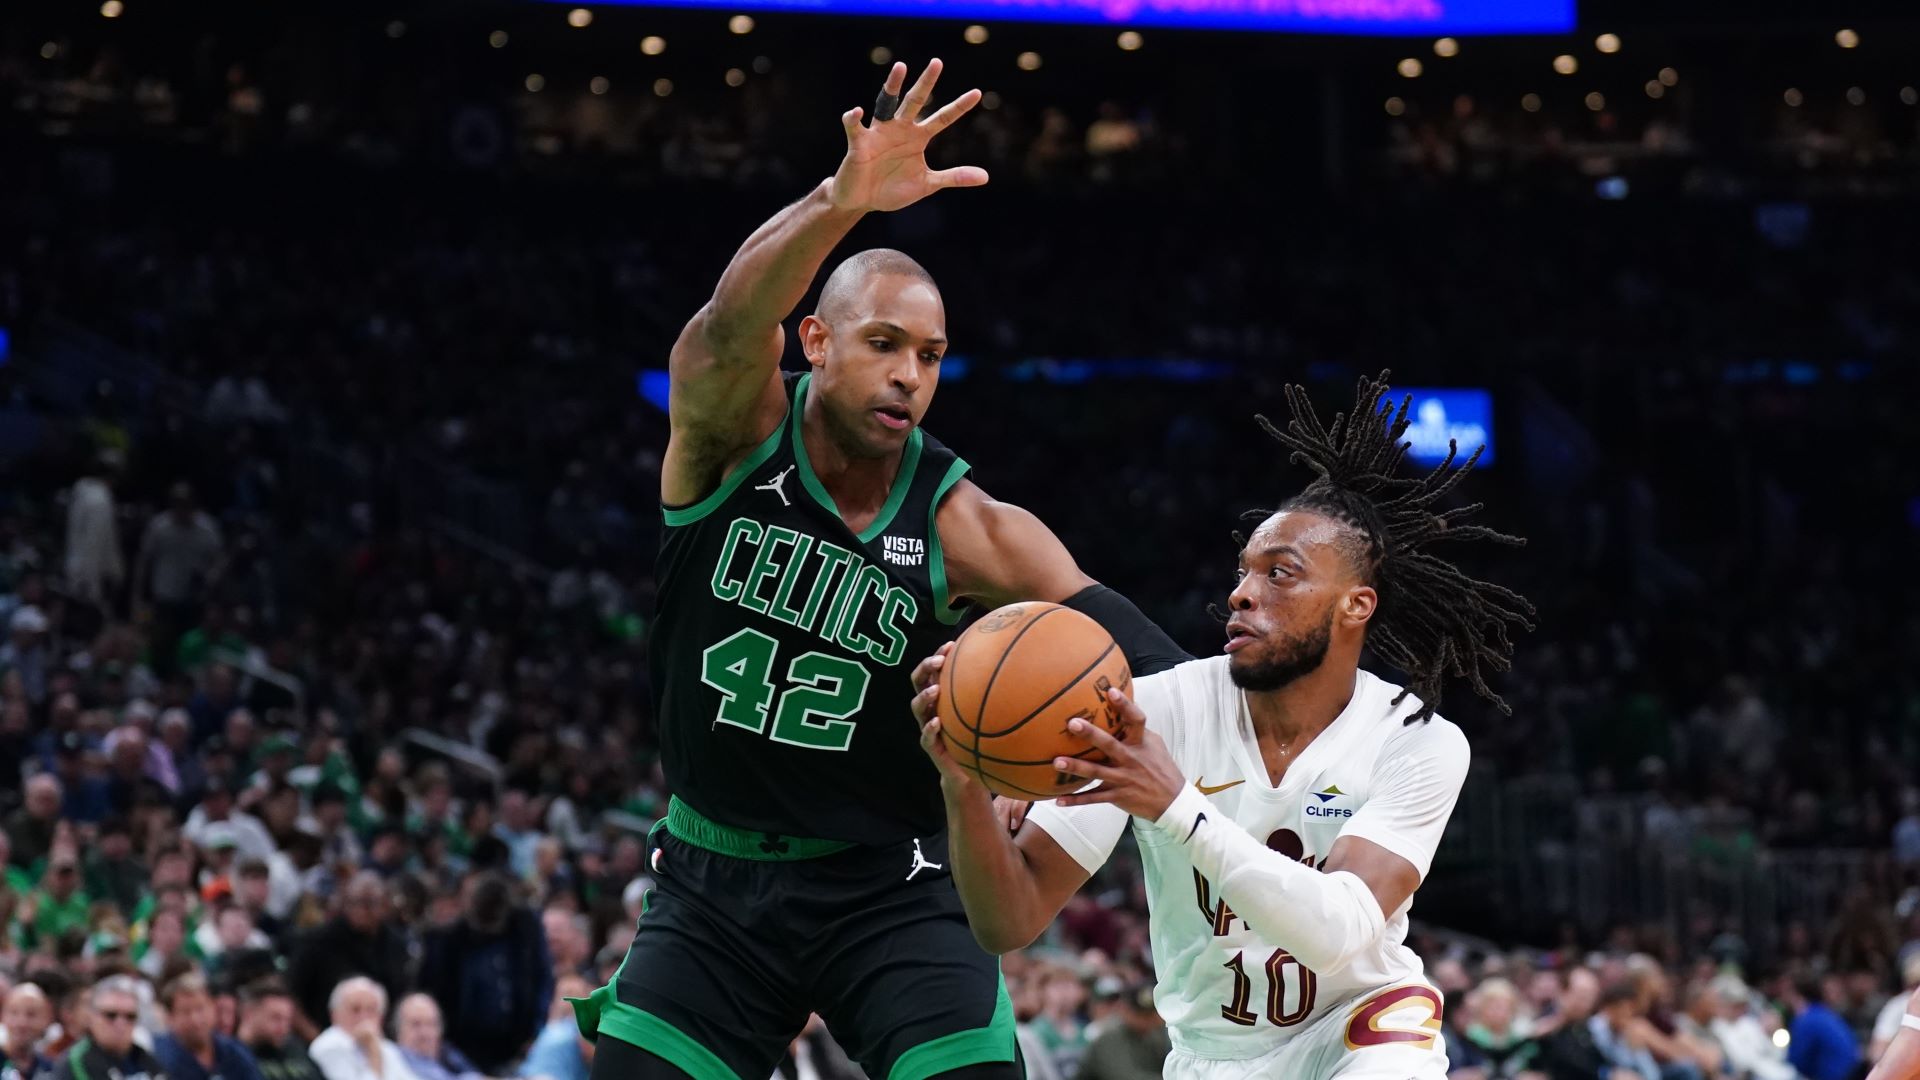 Celtics Wrap: Boston Closes Out Cavs In Game 5 To Reach East Finals